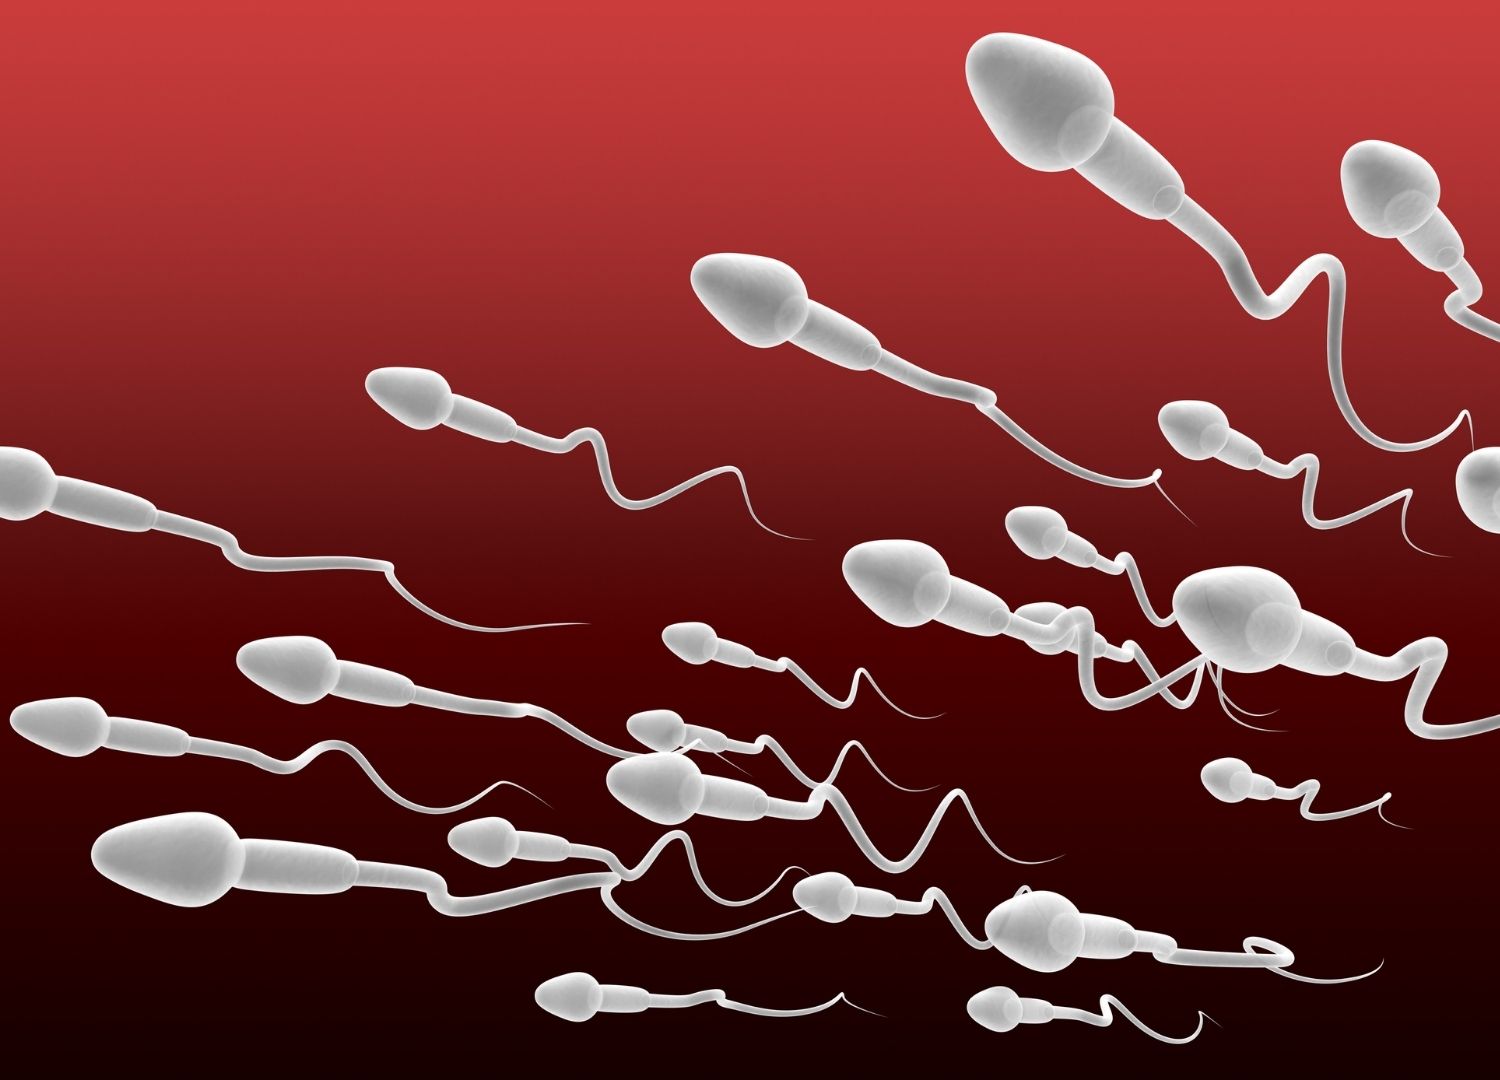 "Low sperm count: Causes and  solutions"